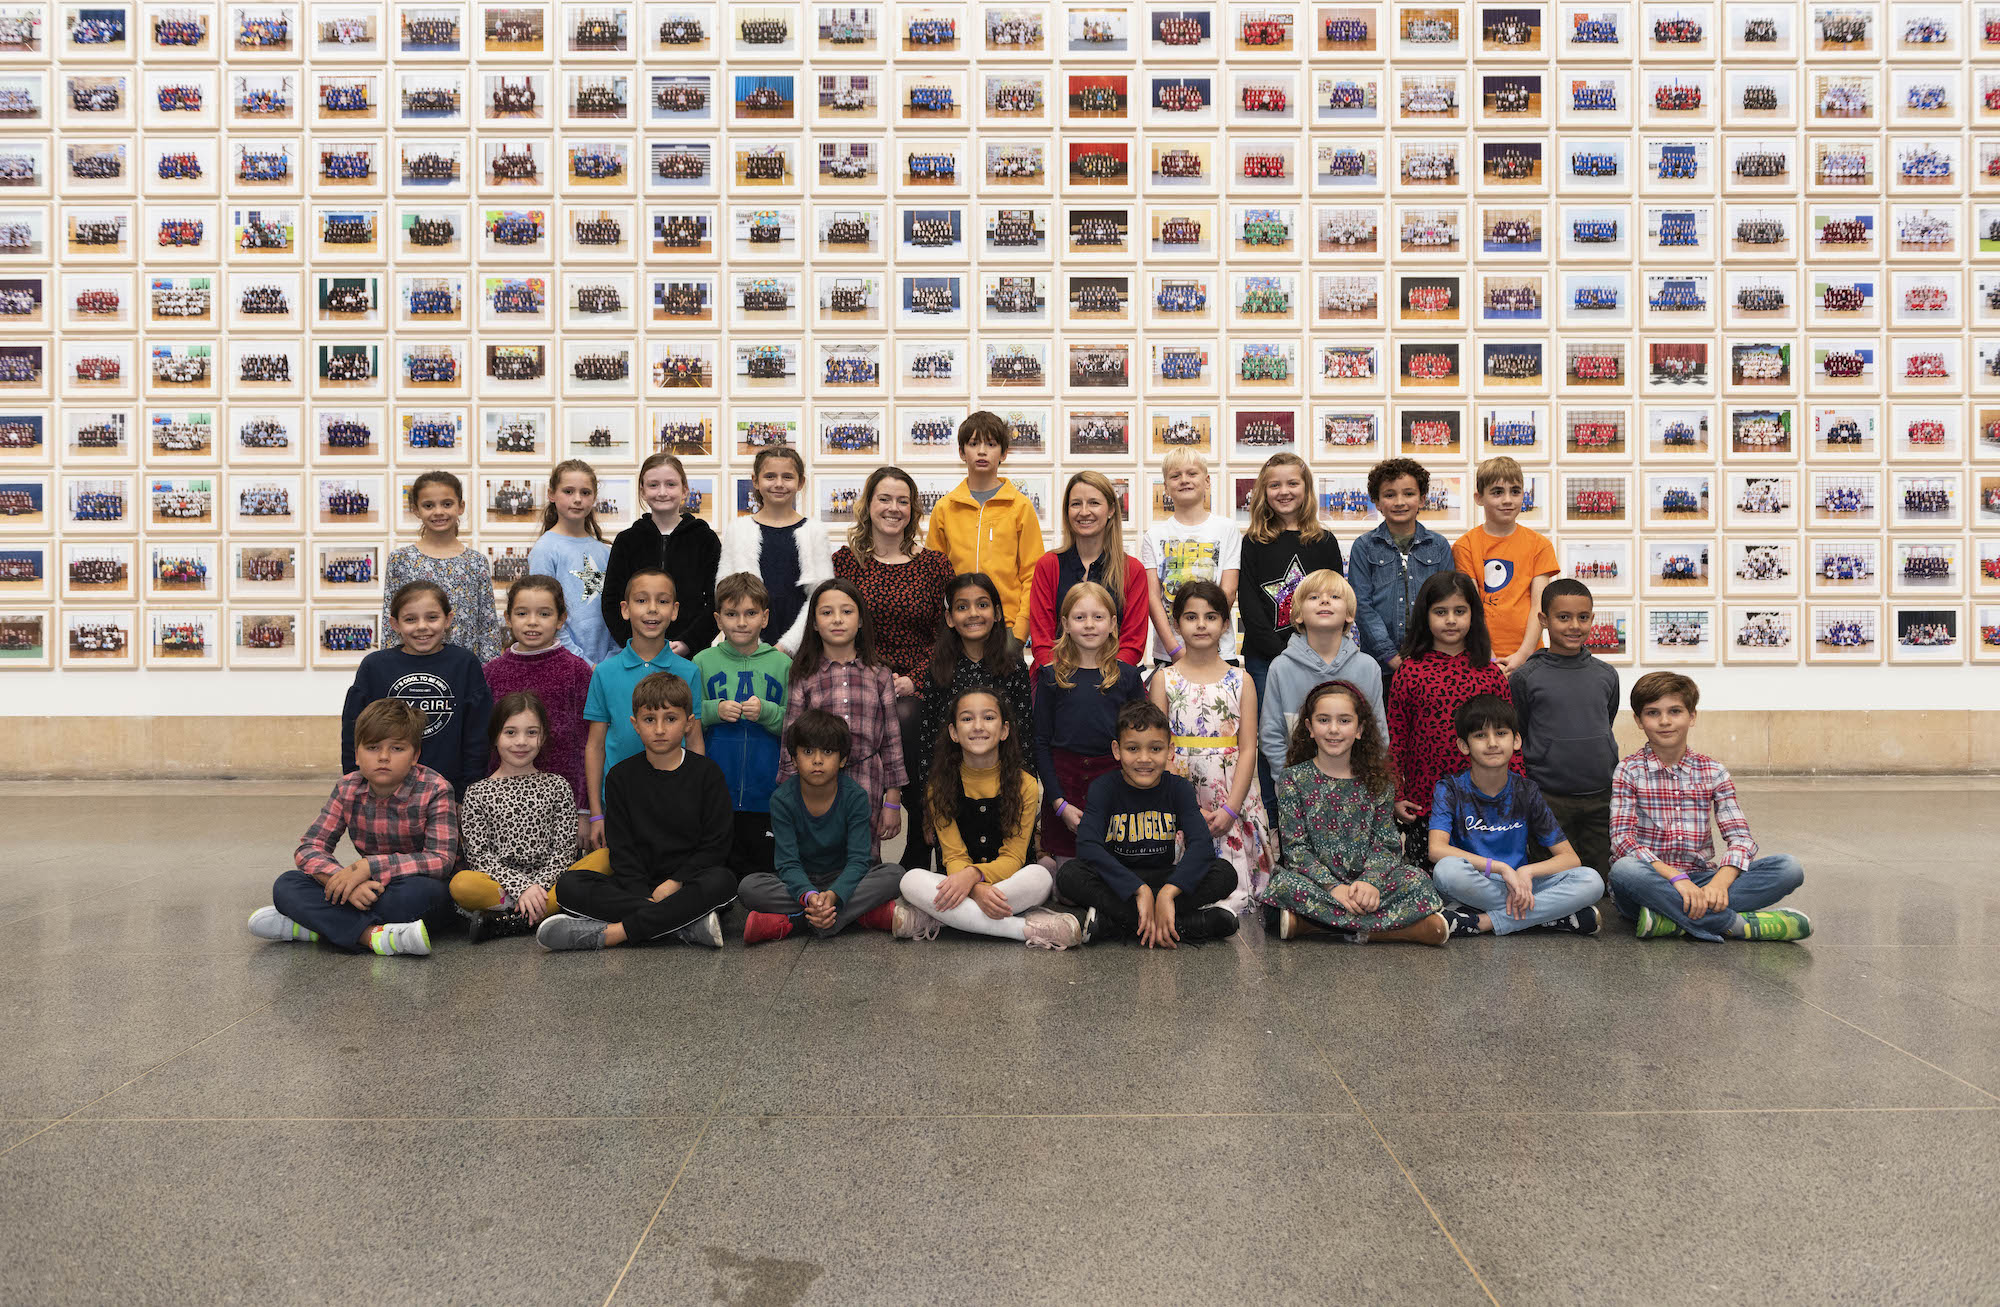 Little Ealing Primary visiting Steve McQueen Year 3 at Tate Britain © Tate. Photo David Lennon.jpg